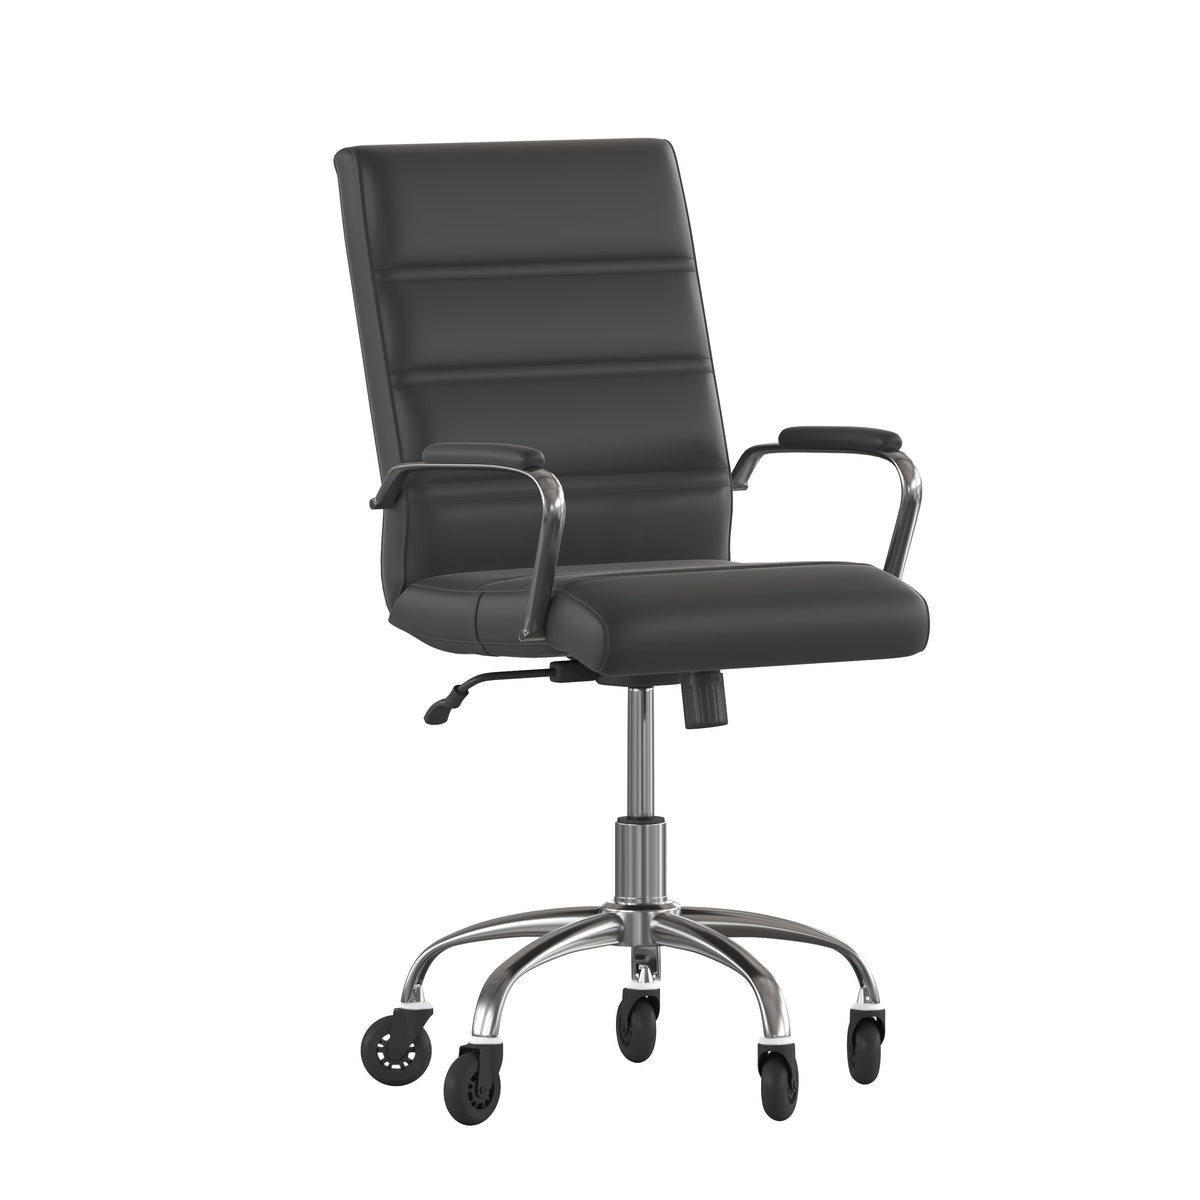 Black LeatherSoft/Chrome Frame |#| Executive Chair with Chrome Frame & Arms on Skate Wheels - Black LeatherSoft